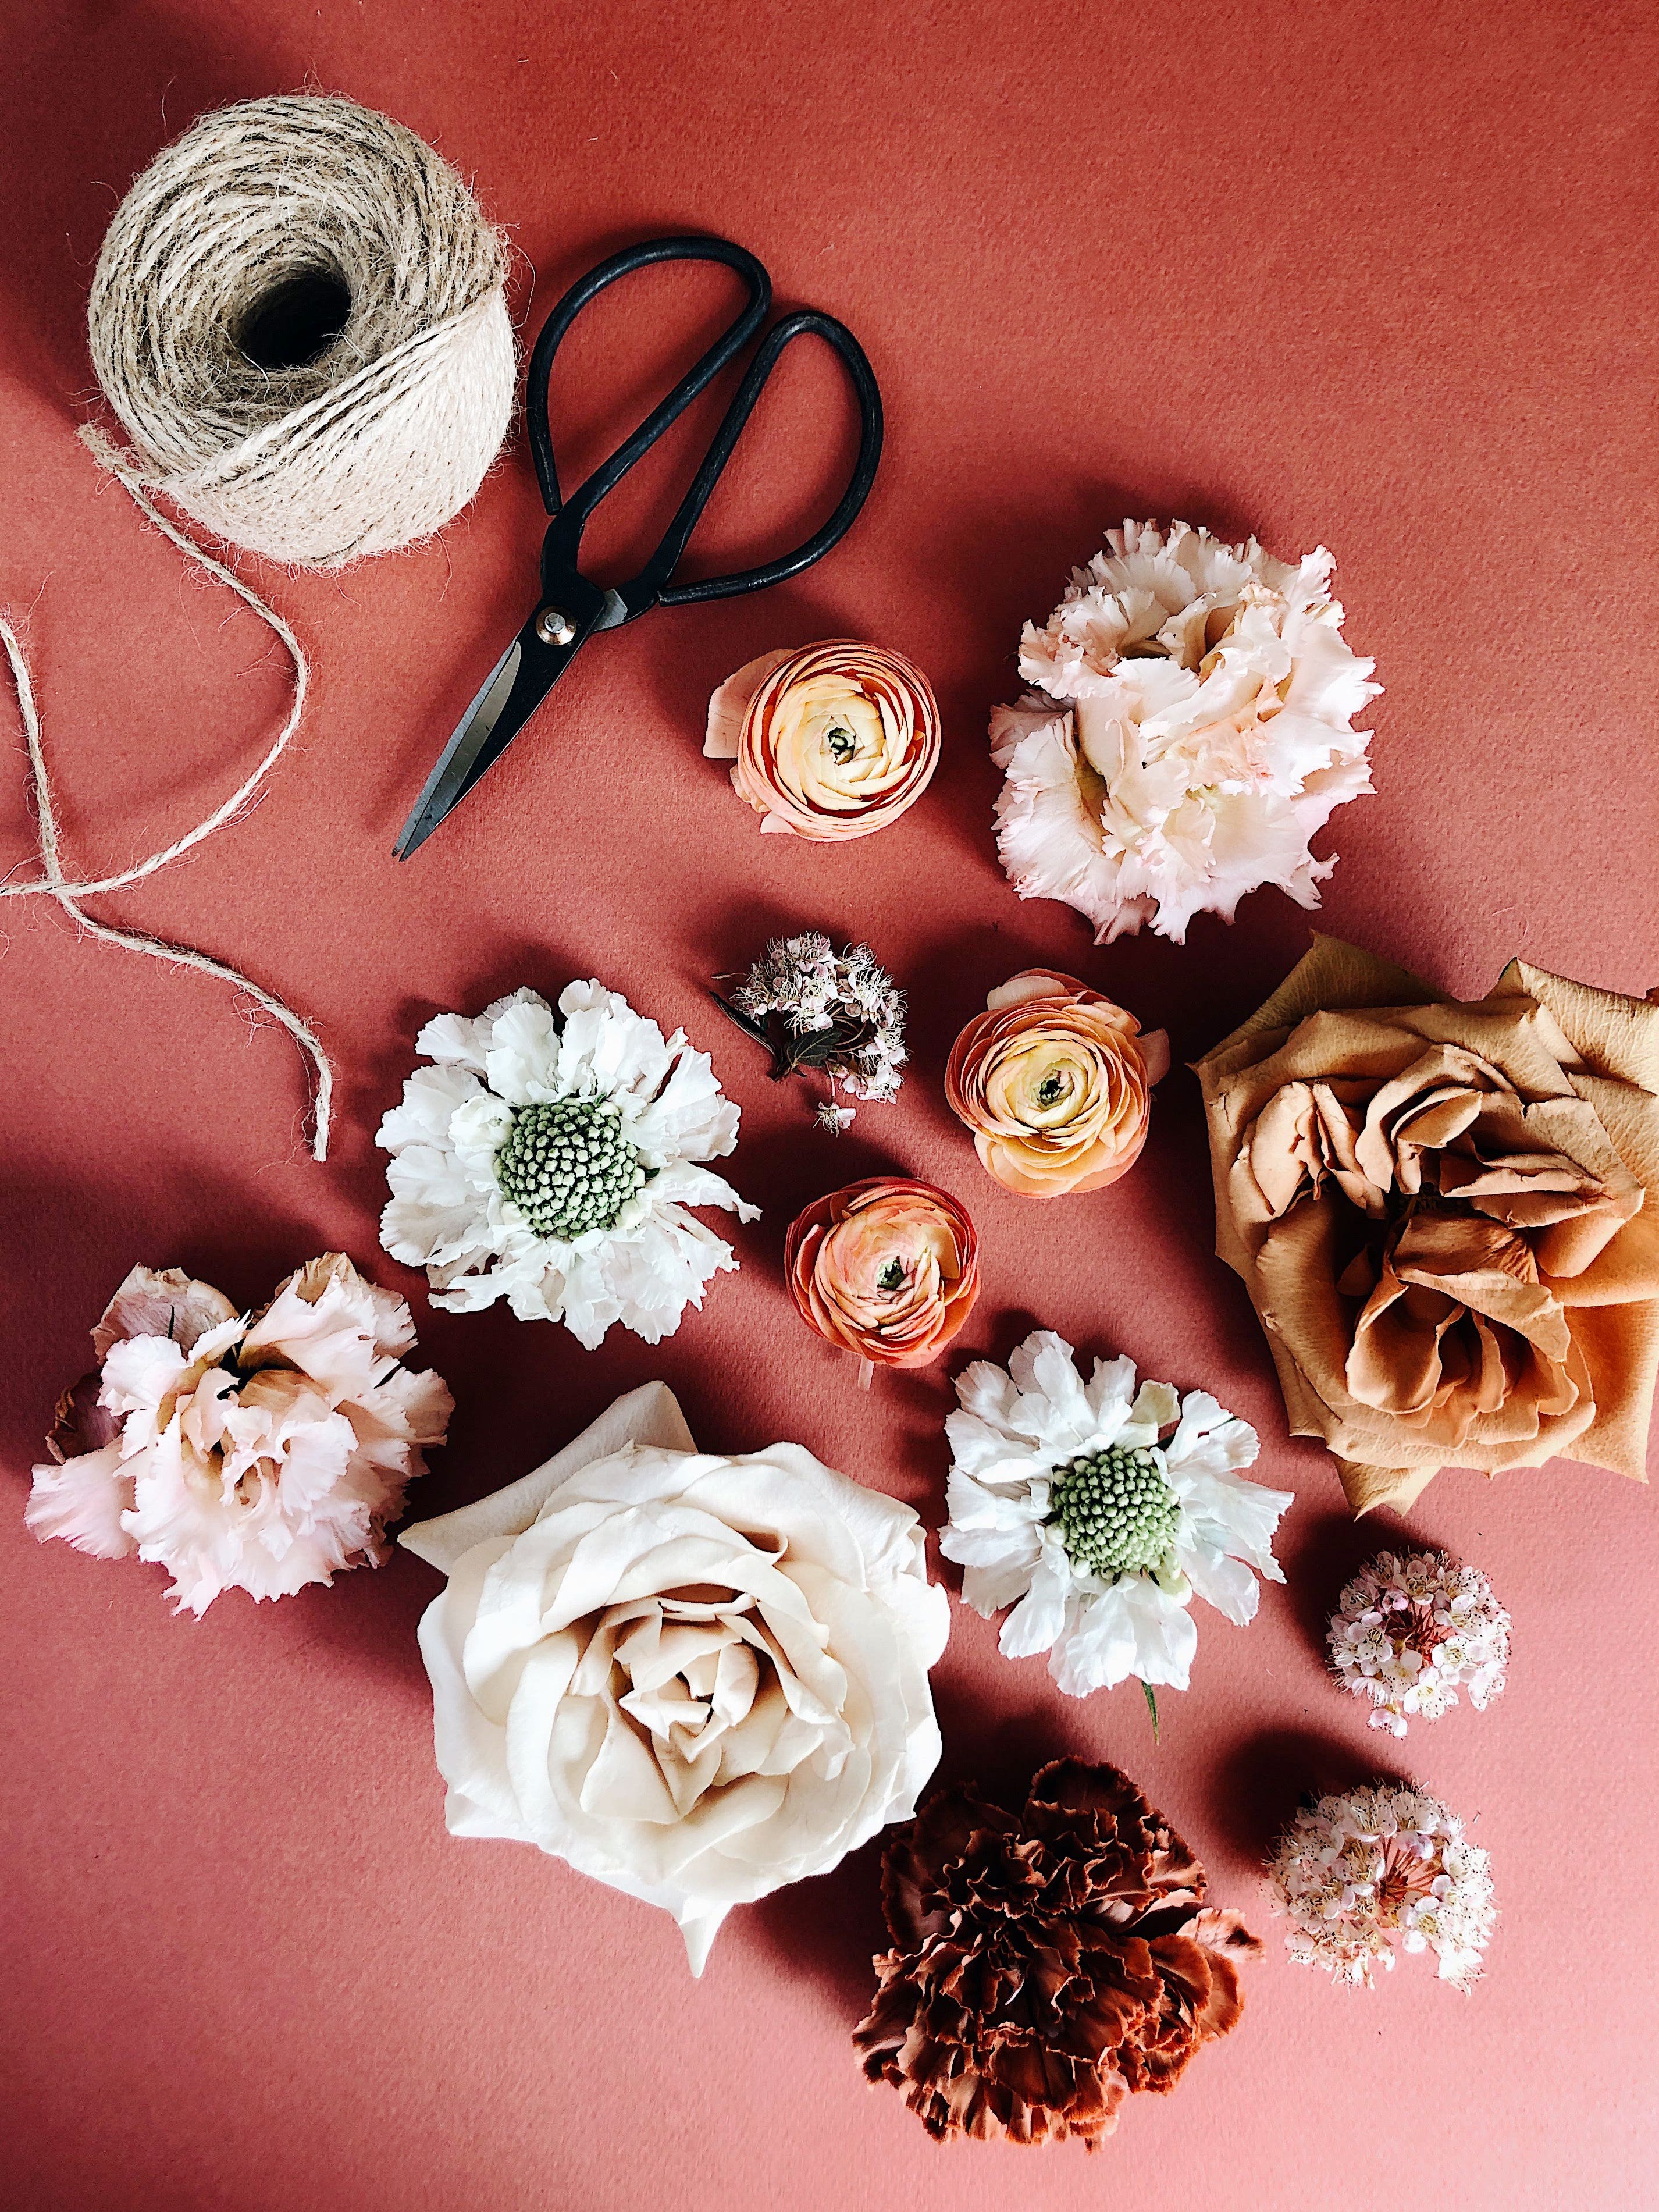 These DIY Flower Bouquets Are Actually Super-Easy to Make